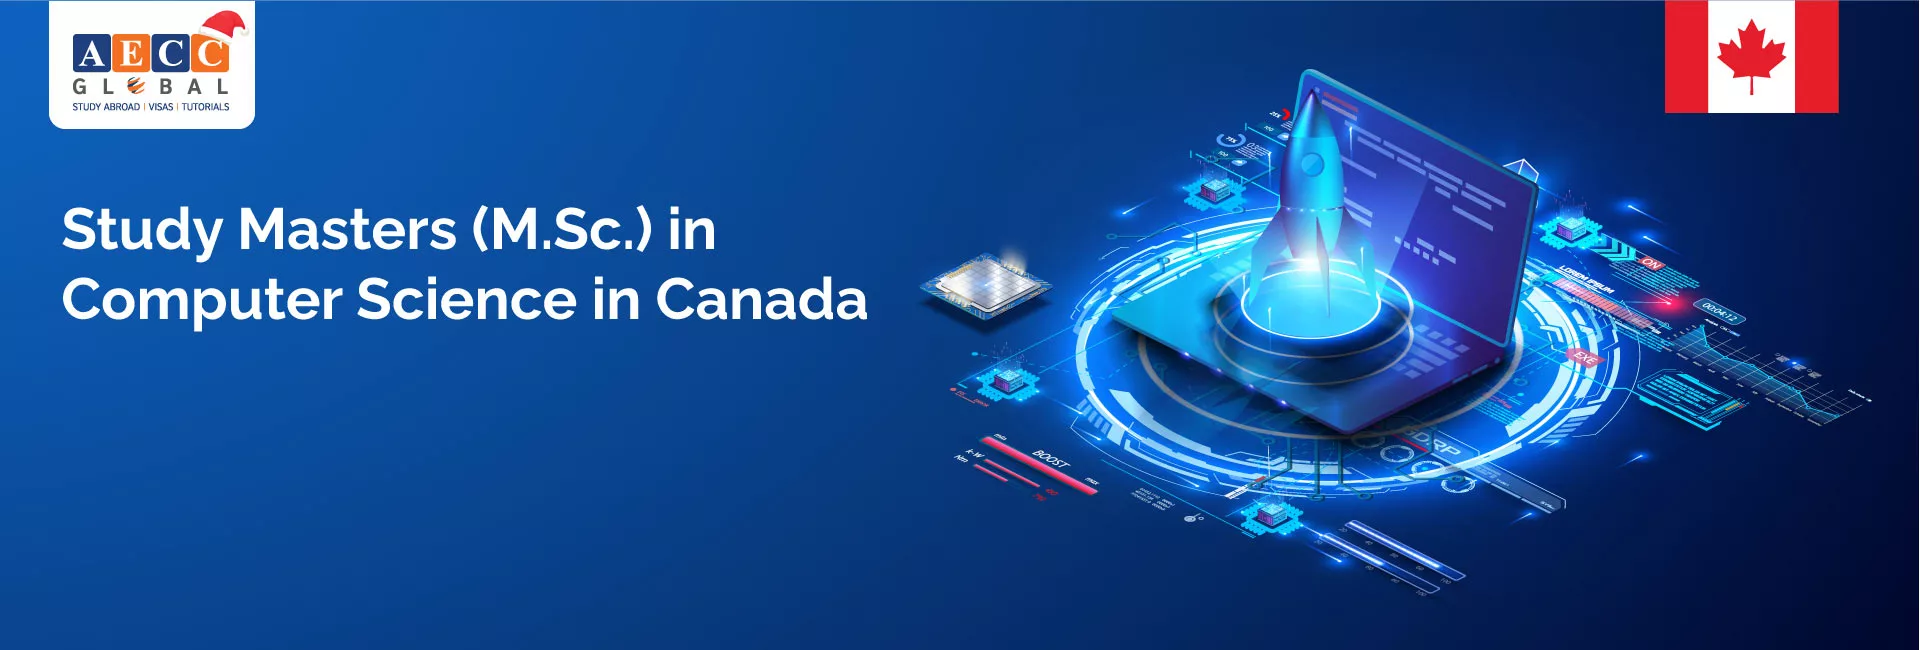 Study Masters (MS) in Computer Science in Canada | AECC Global